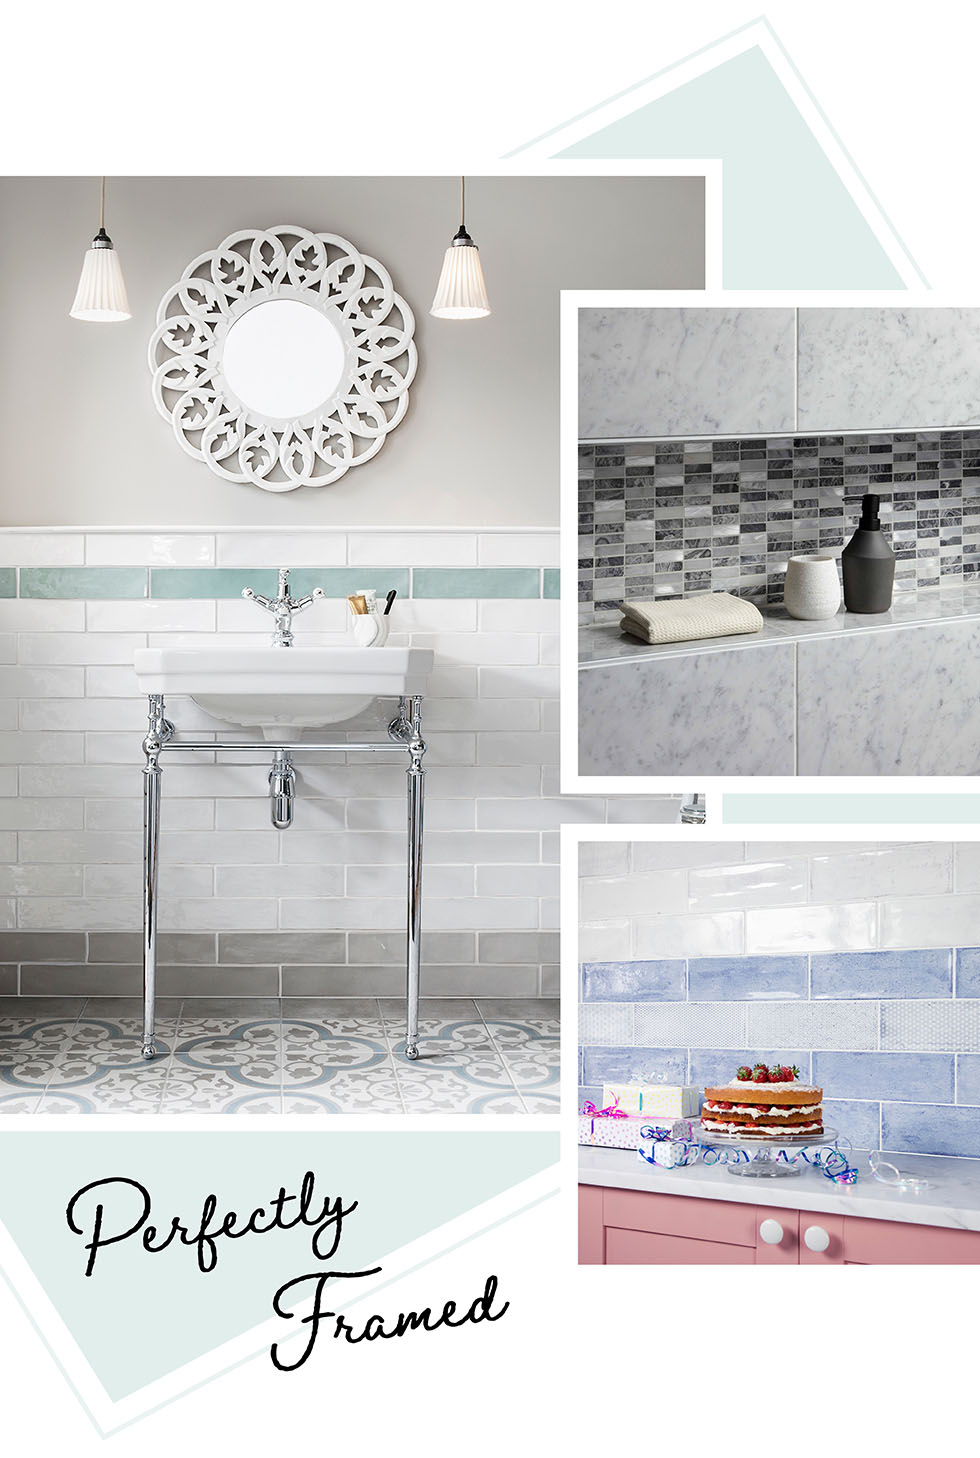 Poiters, Gemini Mosaics and Arles tile collections for border tiles